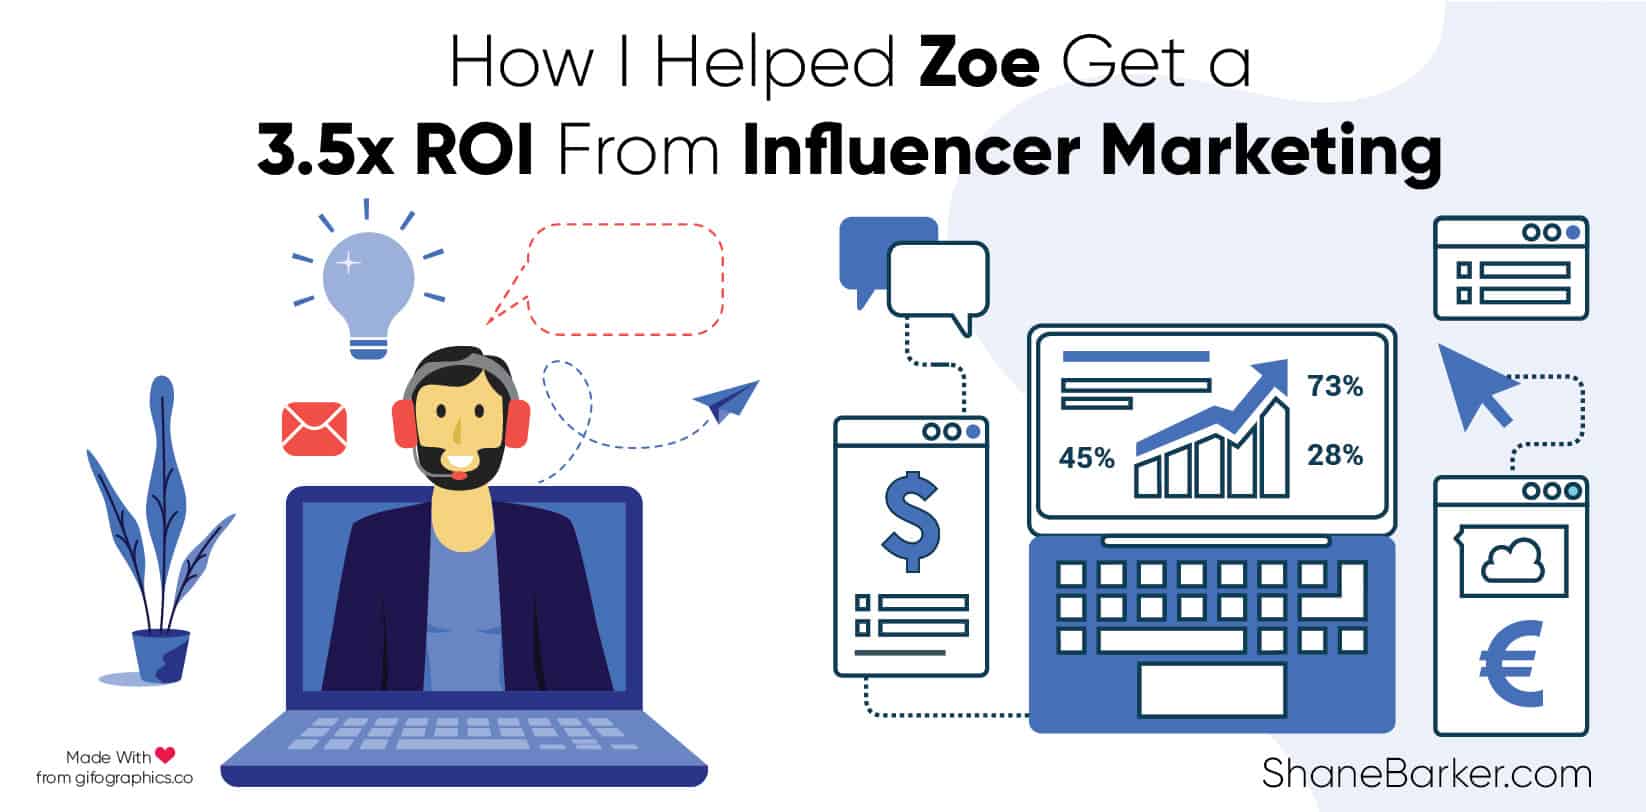 how i helped zoe get a 3.5x roi from influencer marketing – case study